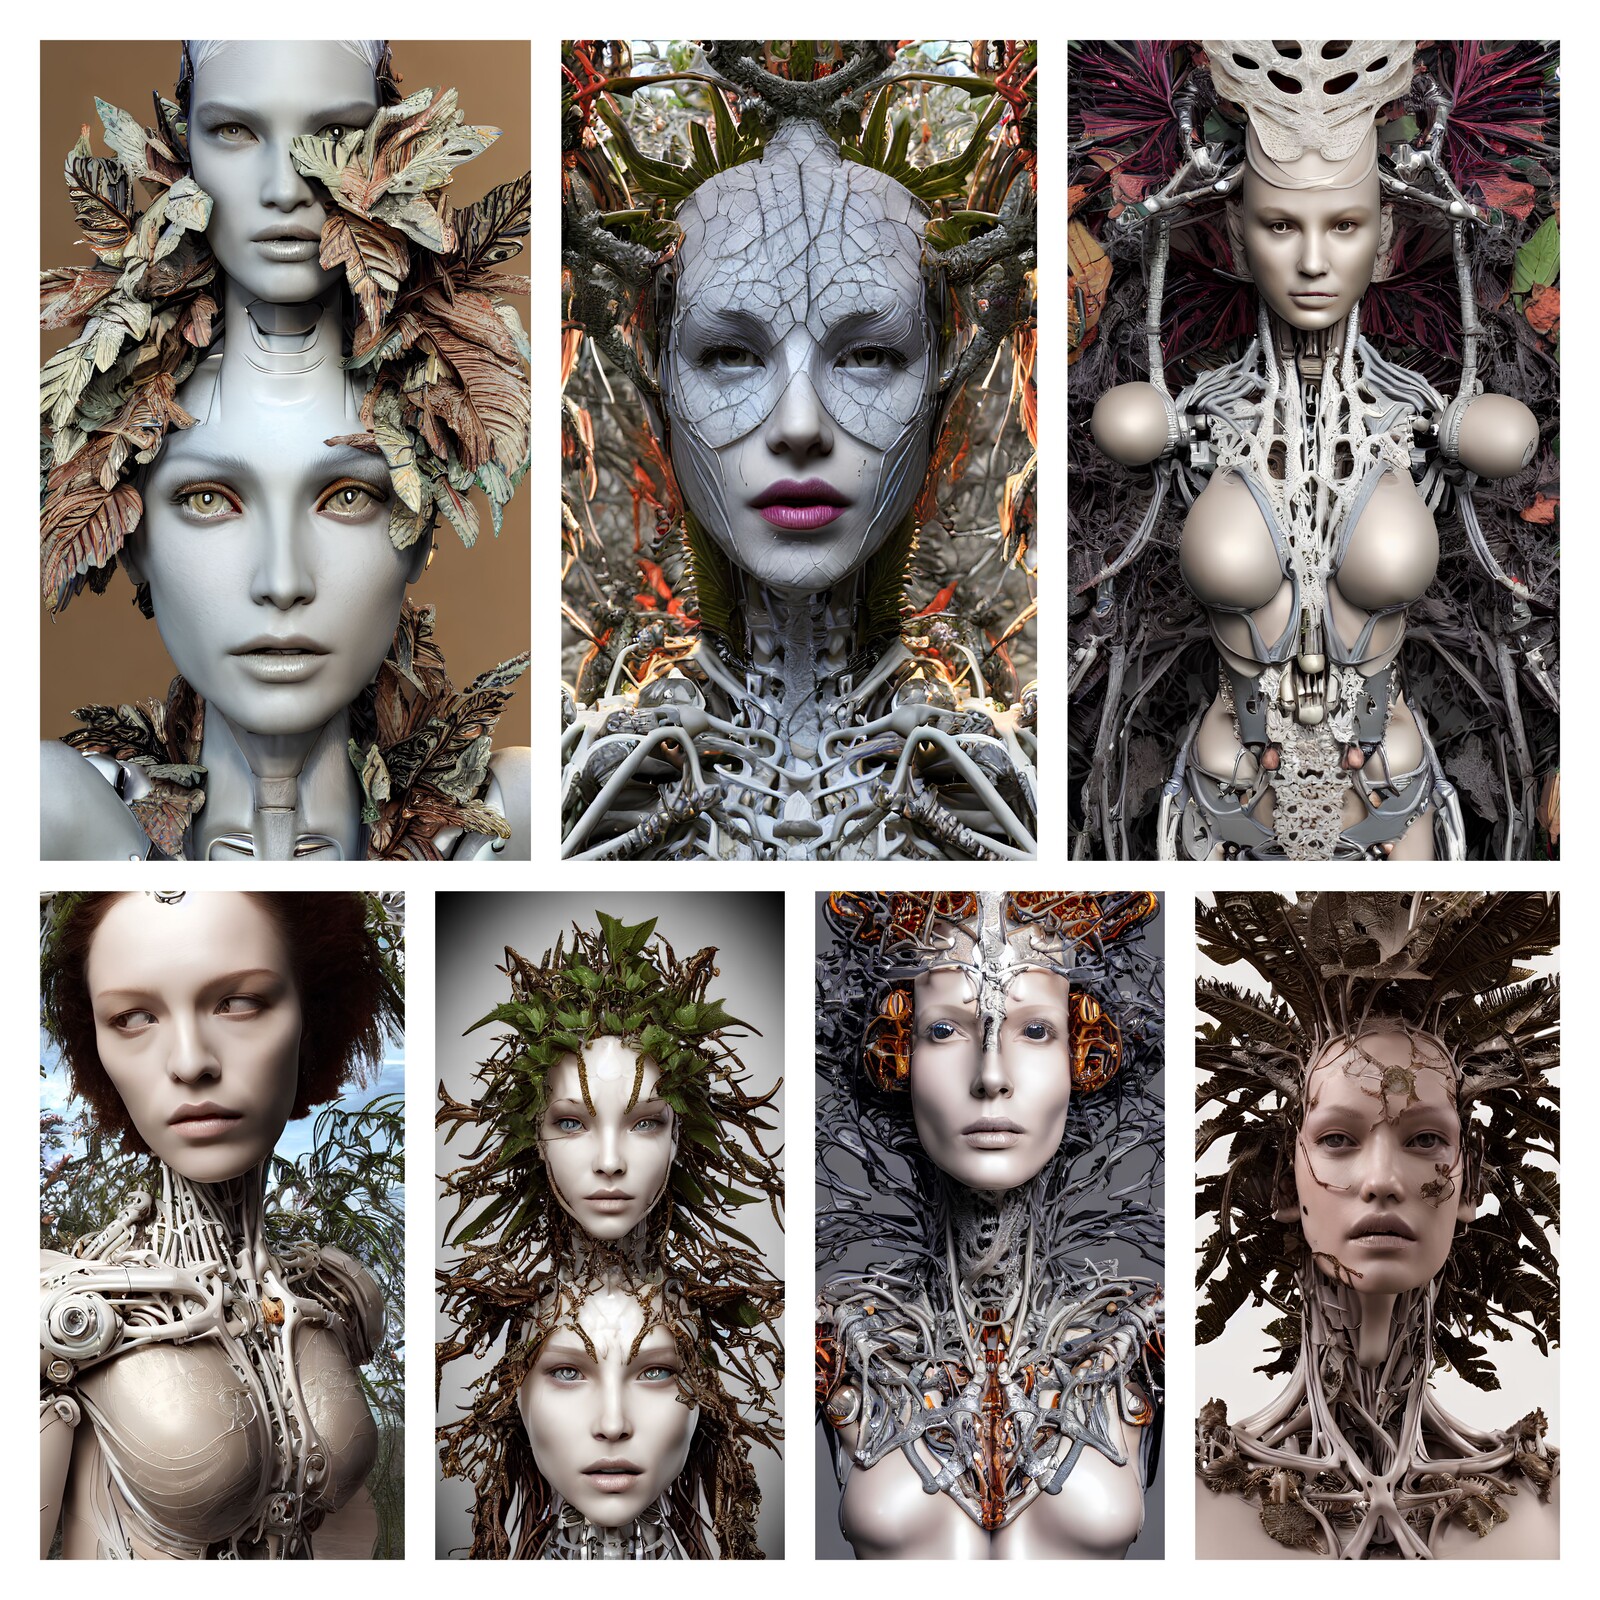 This is a collage of different portraits that I created. It is meant to be a symbolic representation of unwilling victims of transhumanism and technology, forced to be apart of the machine.